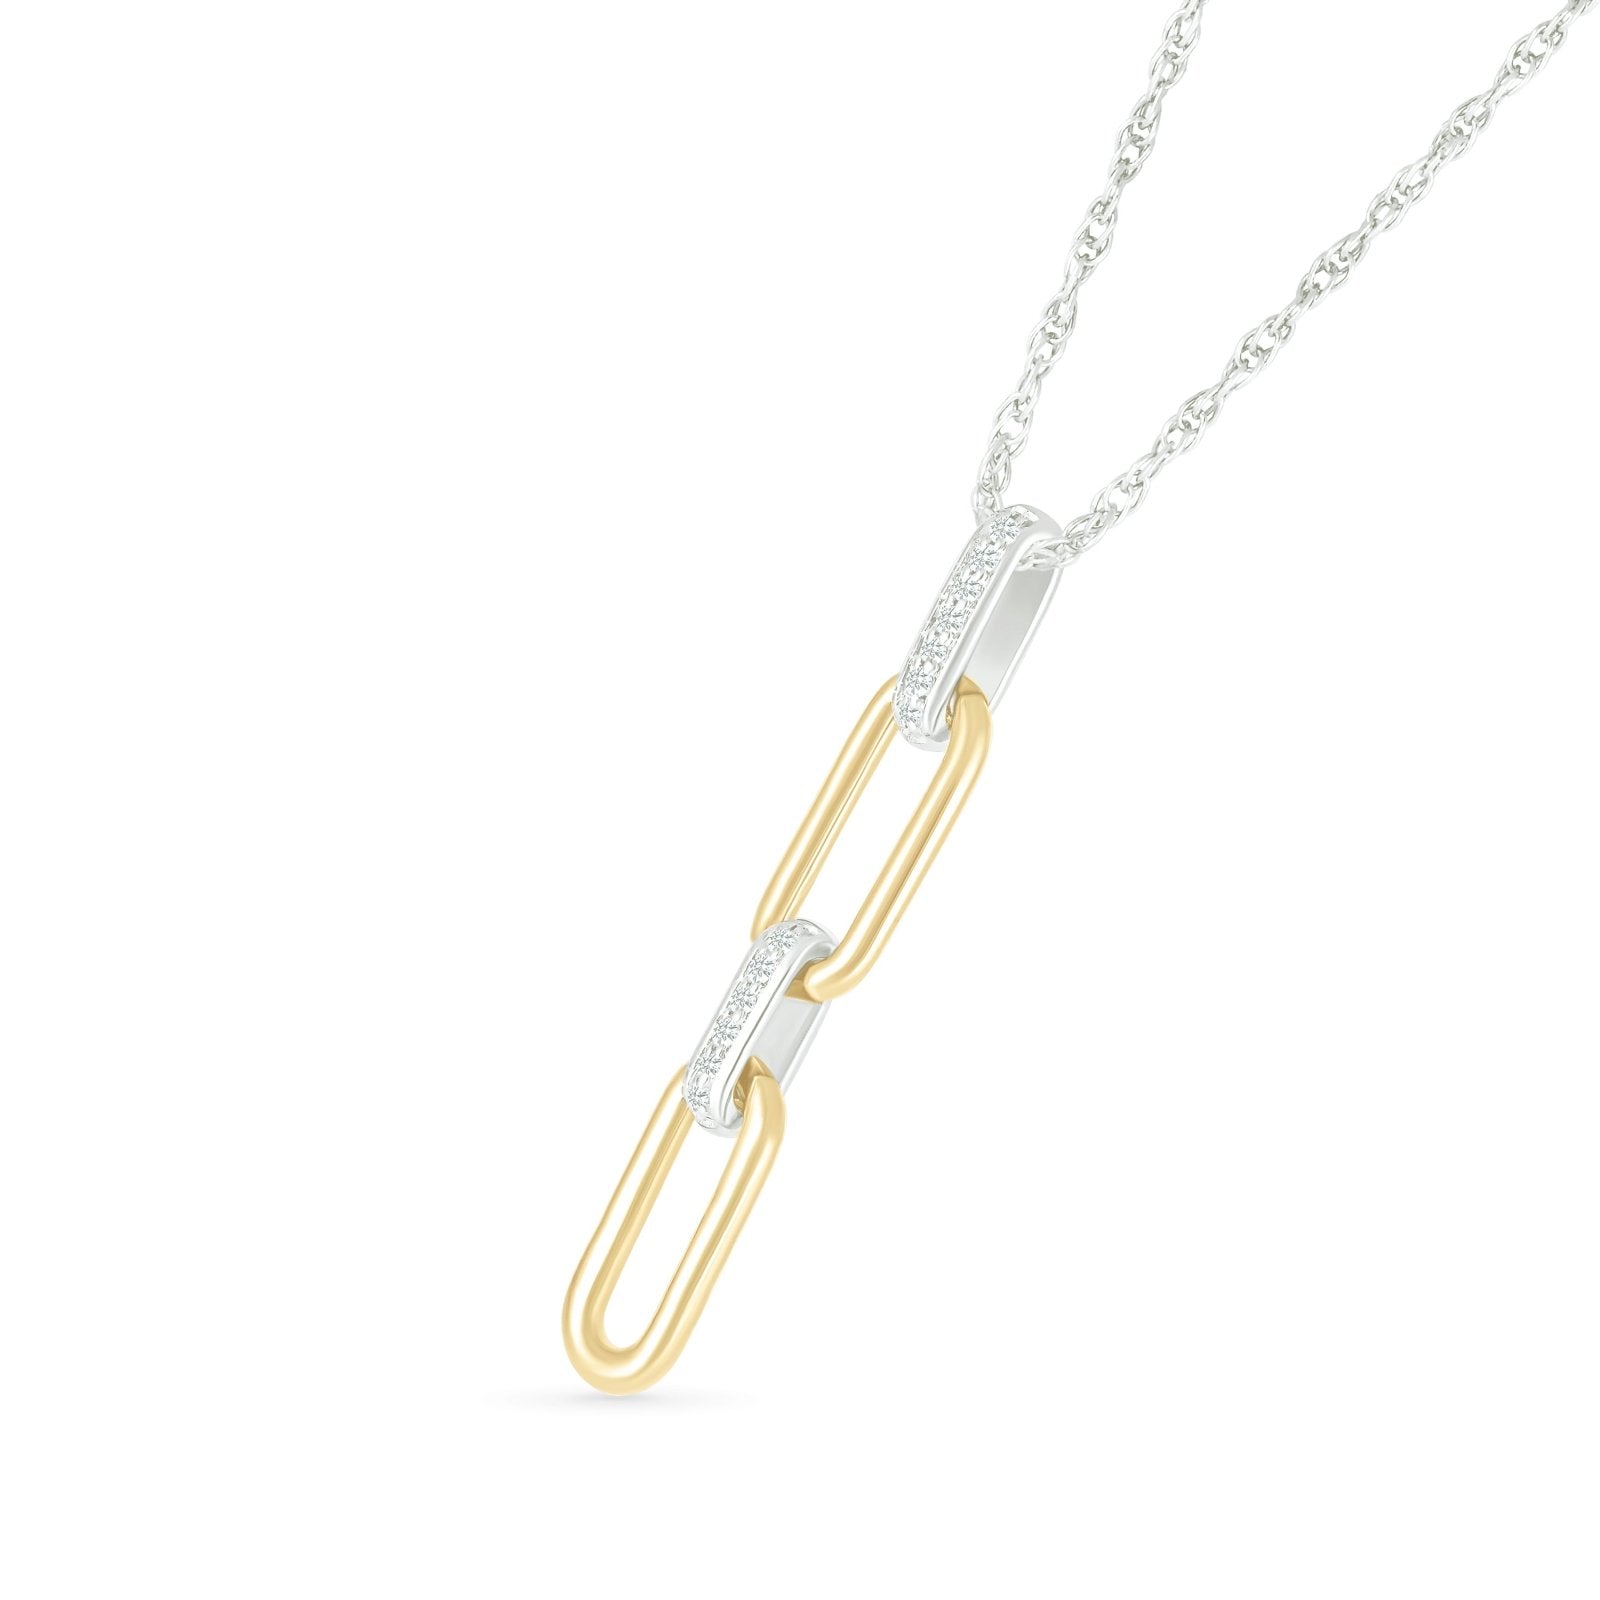 Interlocking Gold and Diamond Paperclip Necklace Necklaces Estella Collection 32719 925 Diamond Sterling Silver #tag4# #tag5# #tag6# #tag7# #tag8# #tag9# #tag10#